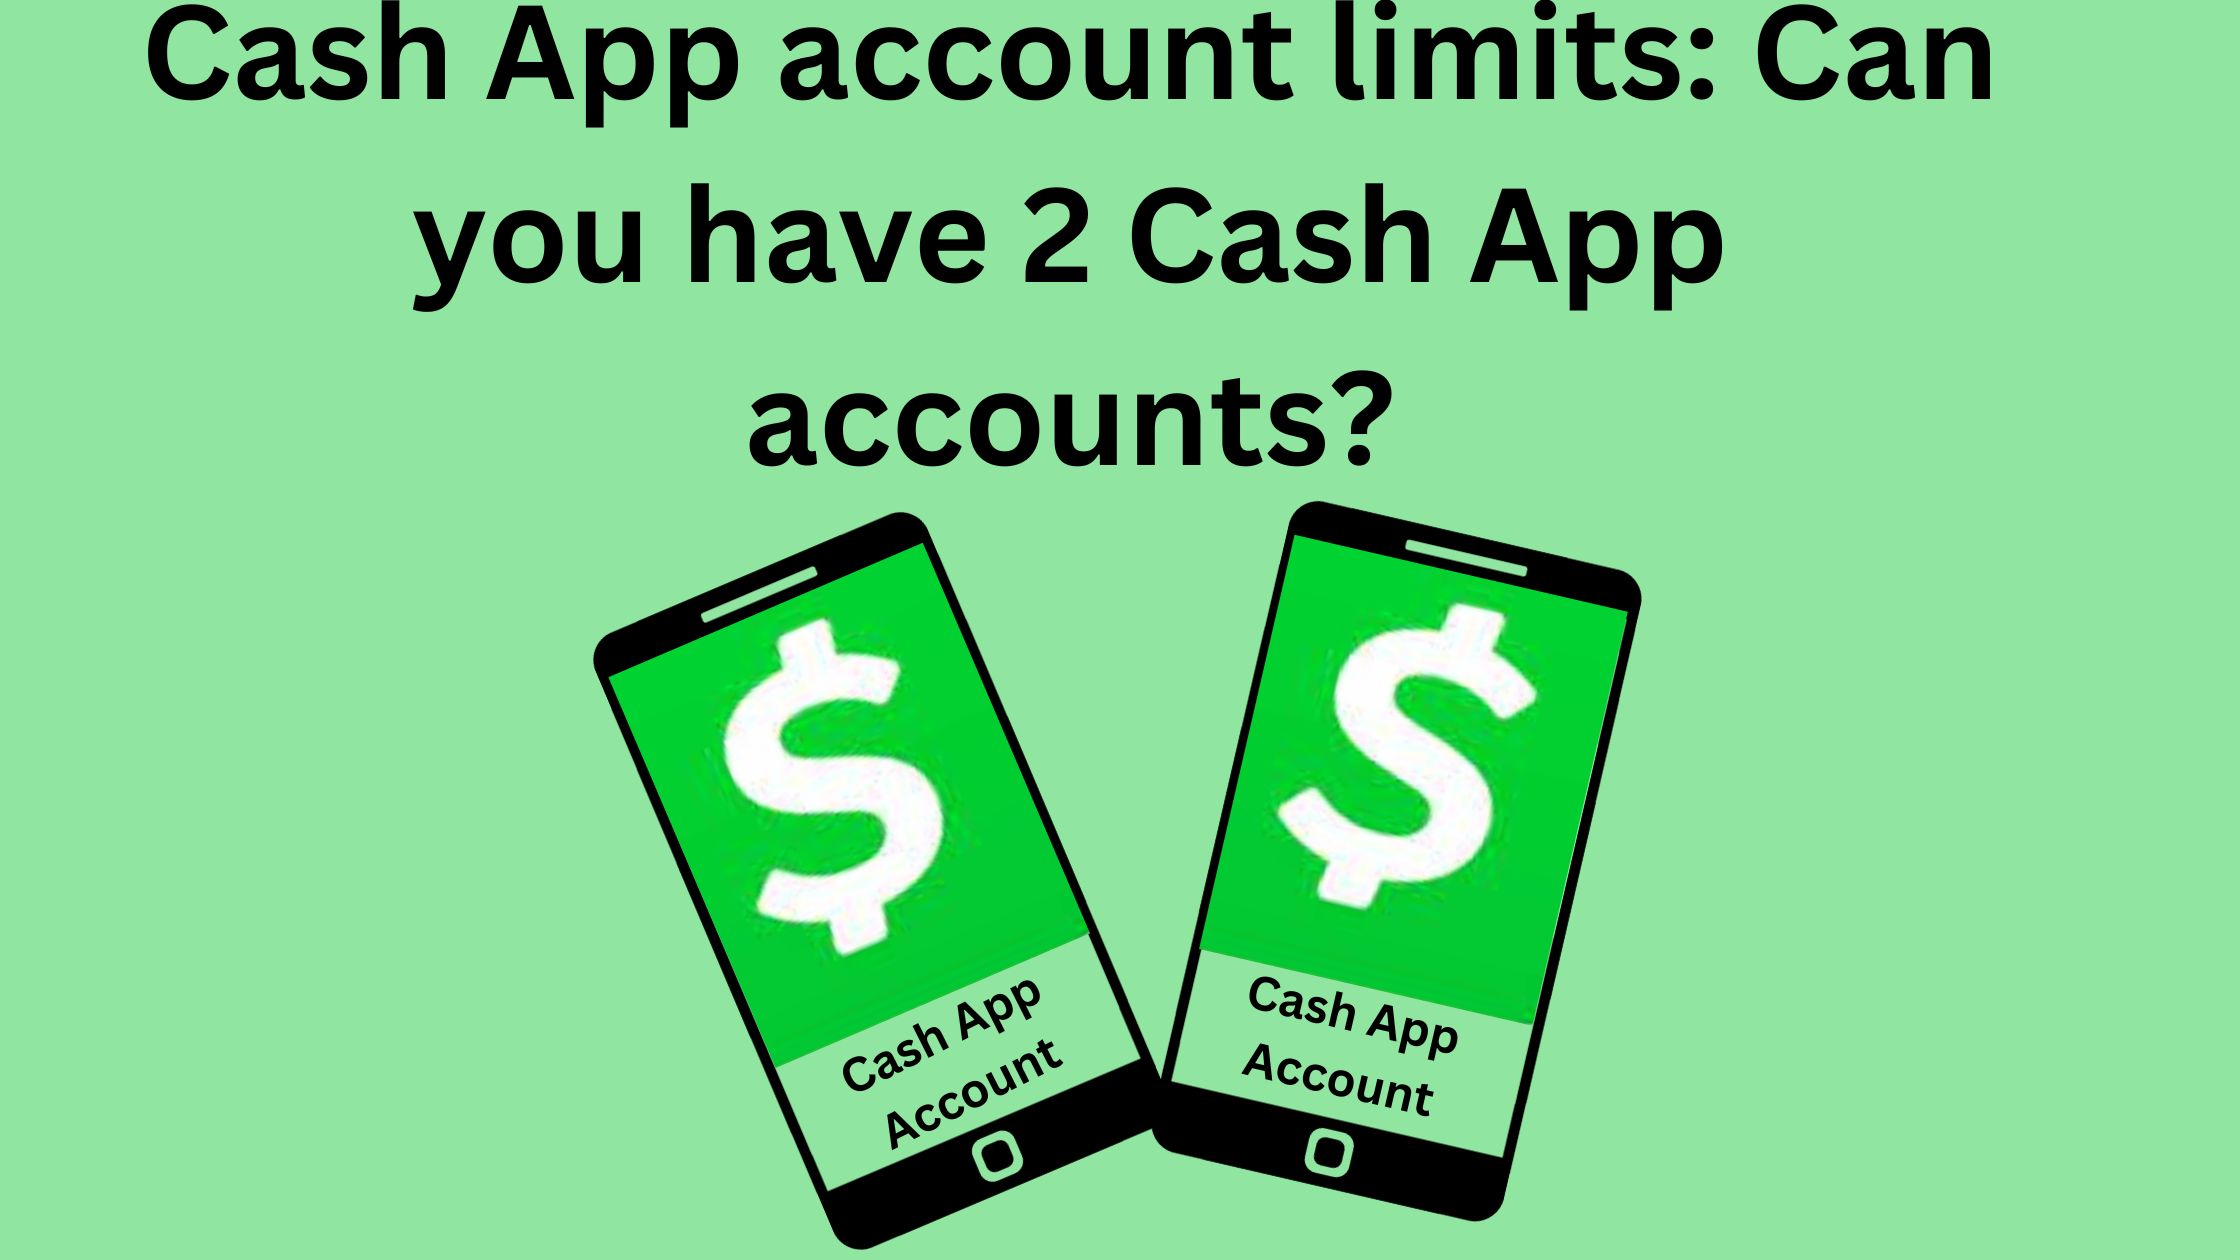 Can you have 2 Cash App accounts